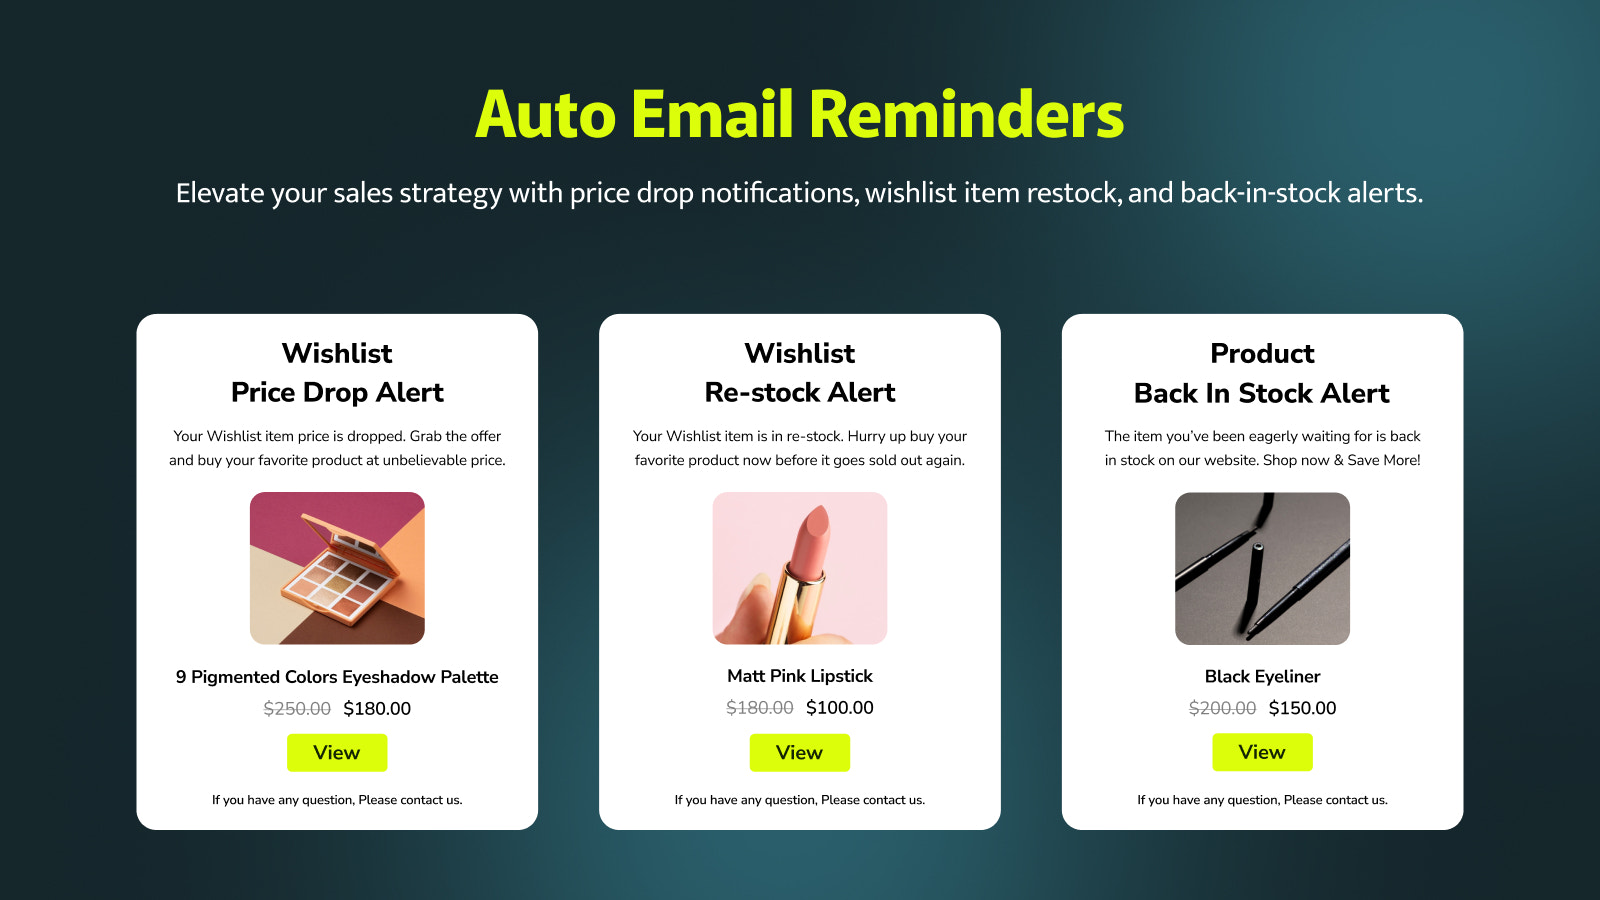 Automate price drop, restock, and back-in-stock alerts